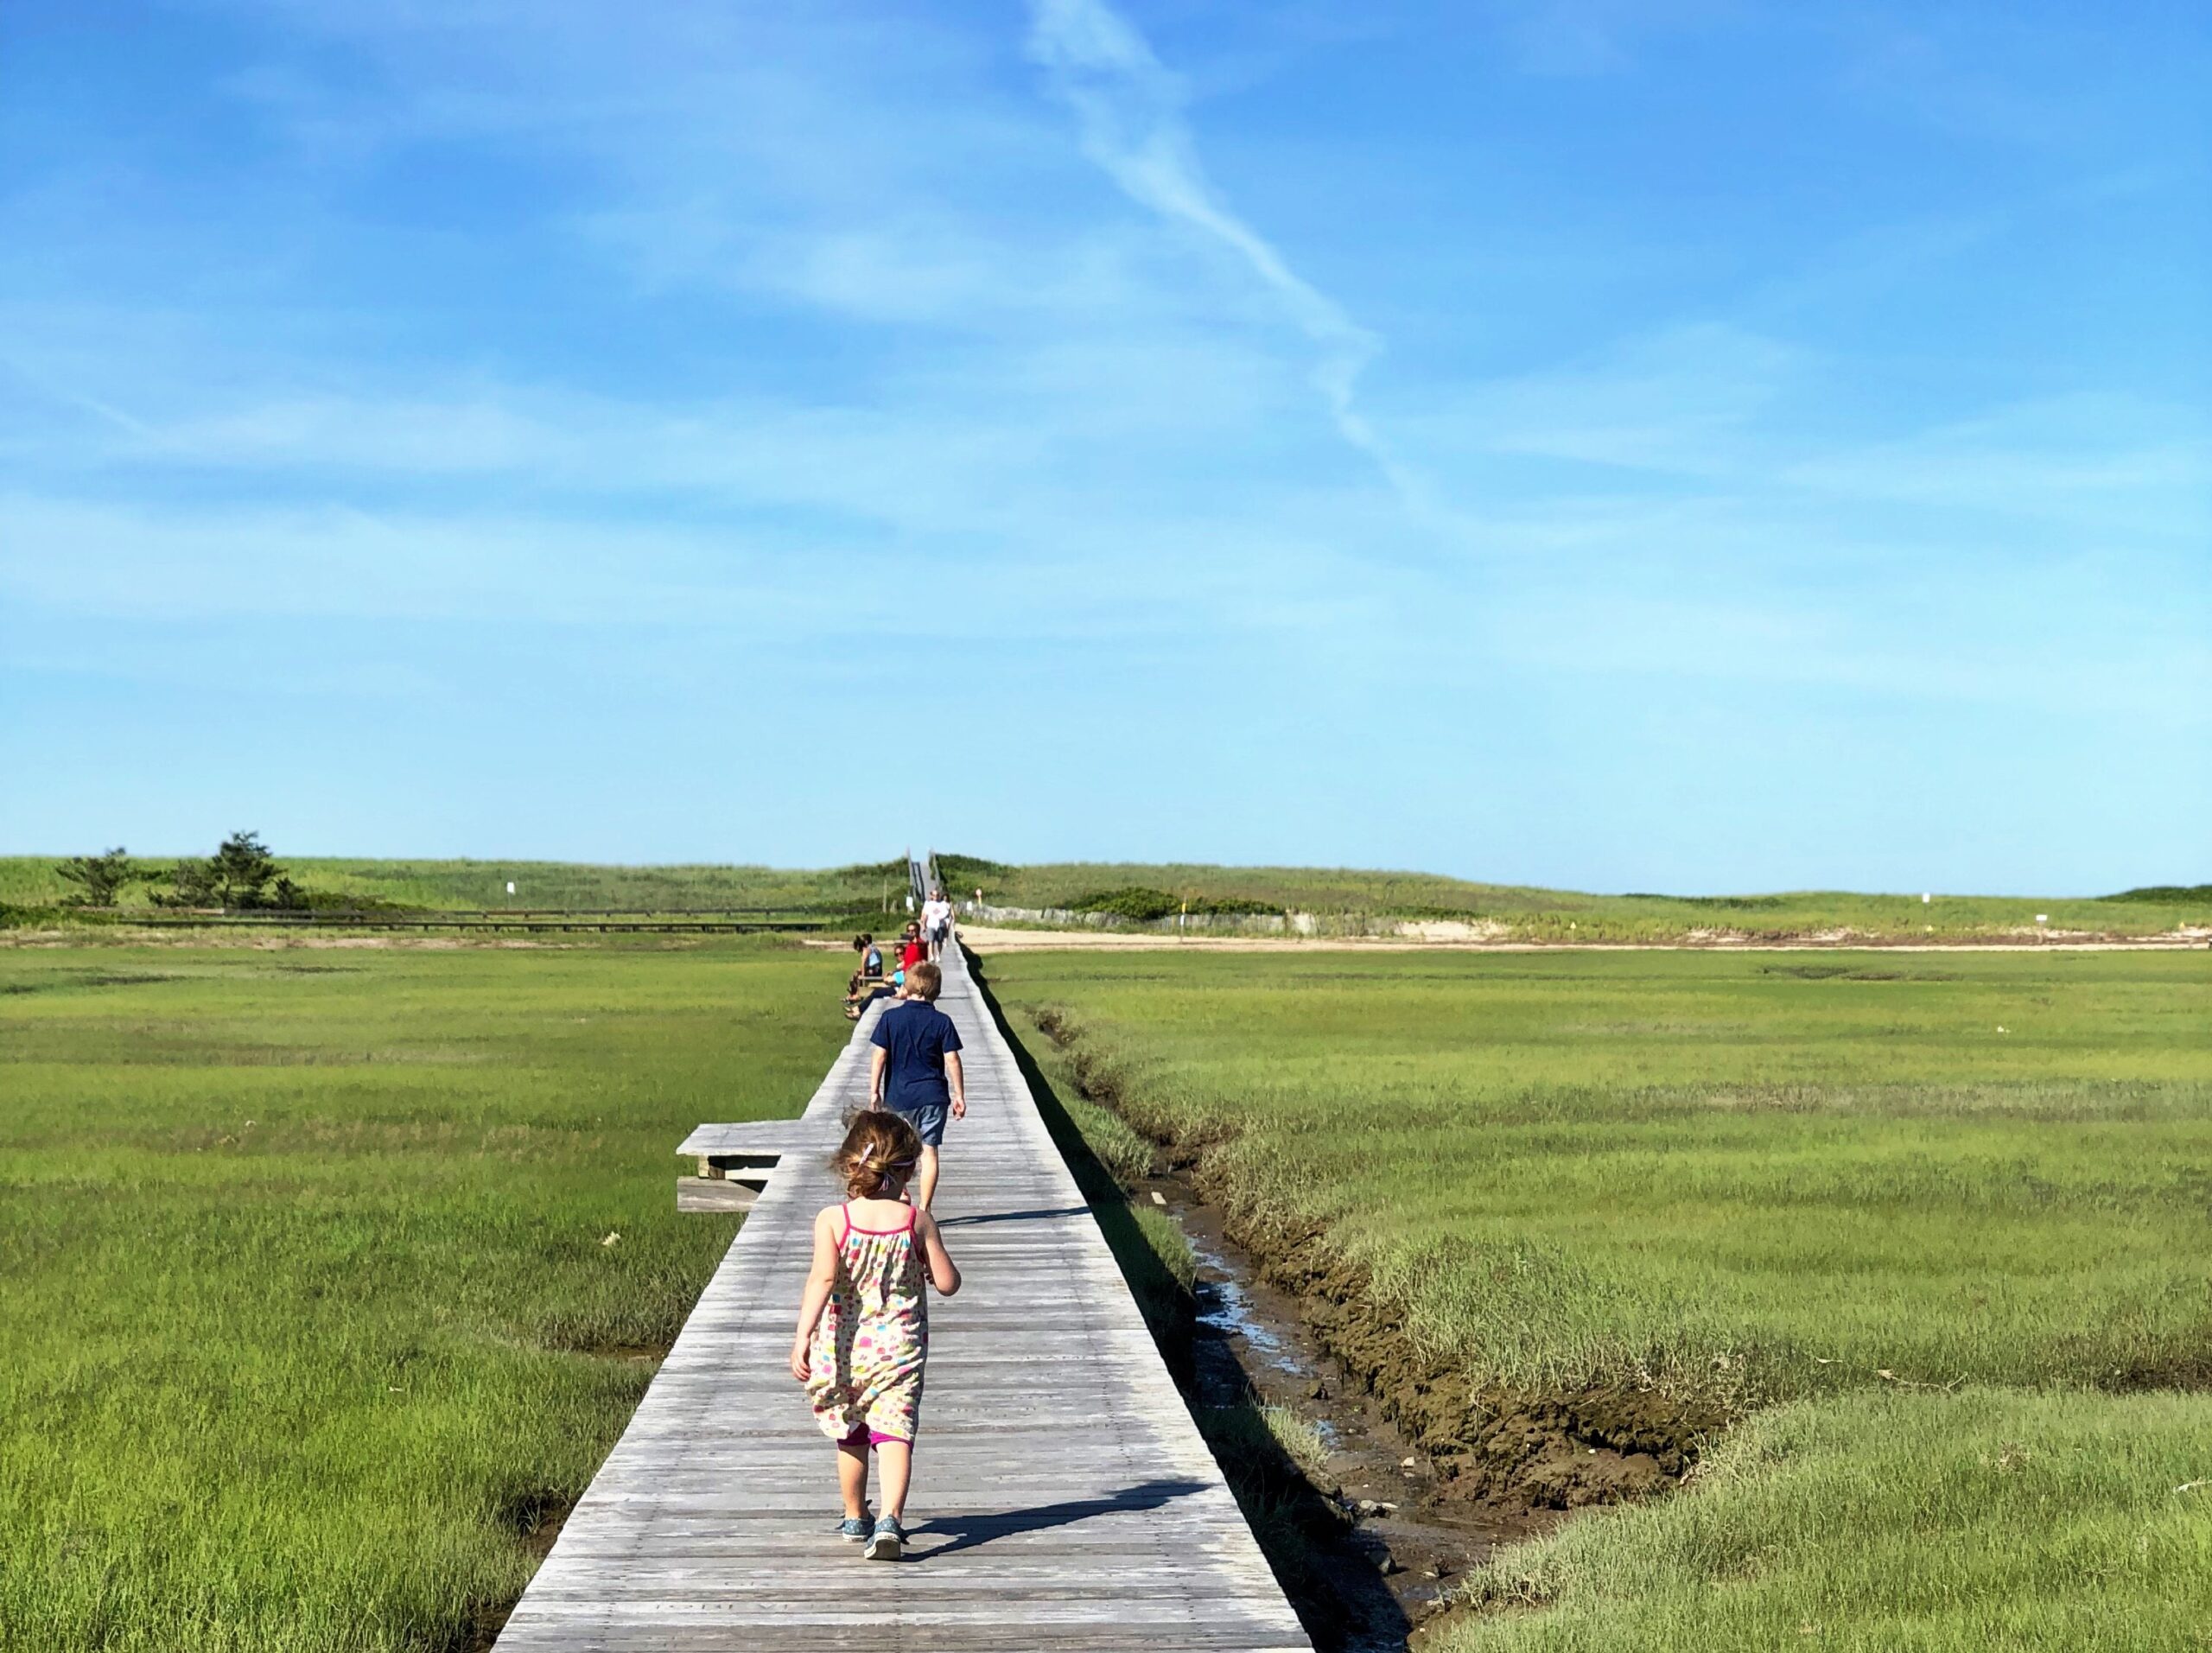 Family-friendly activities to enjoy on Cape Cod